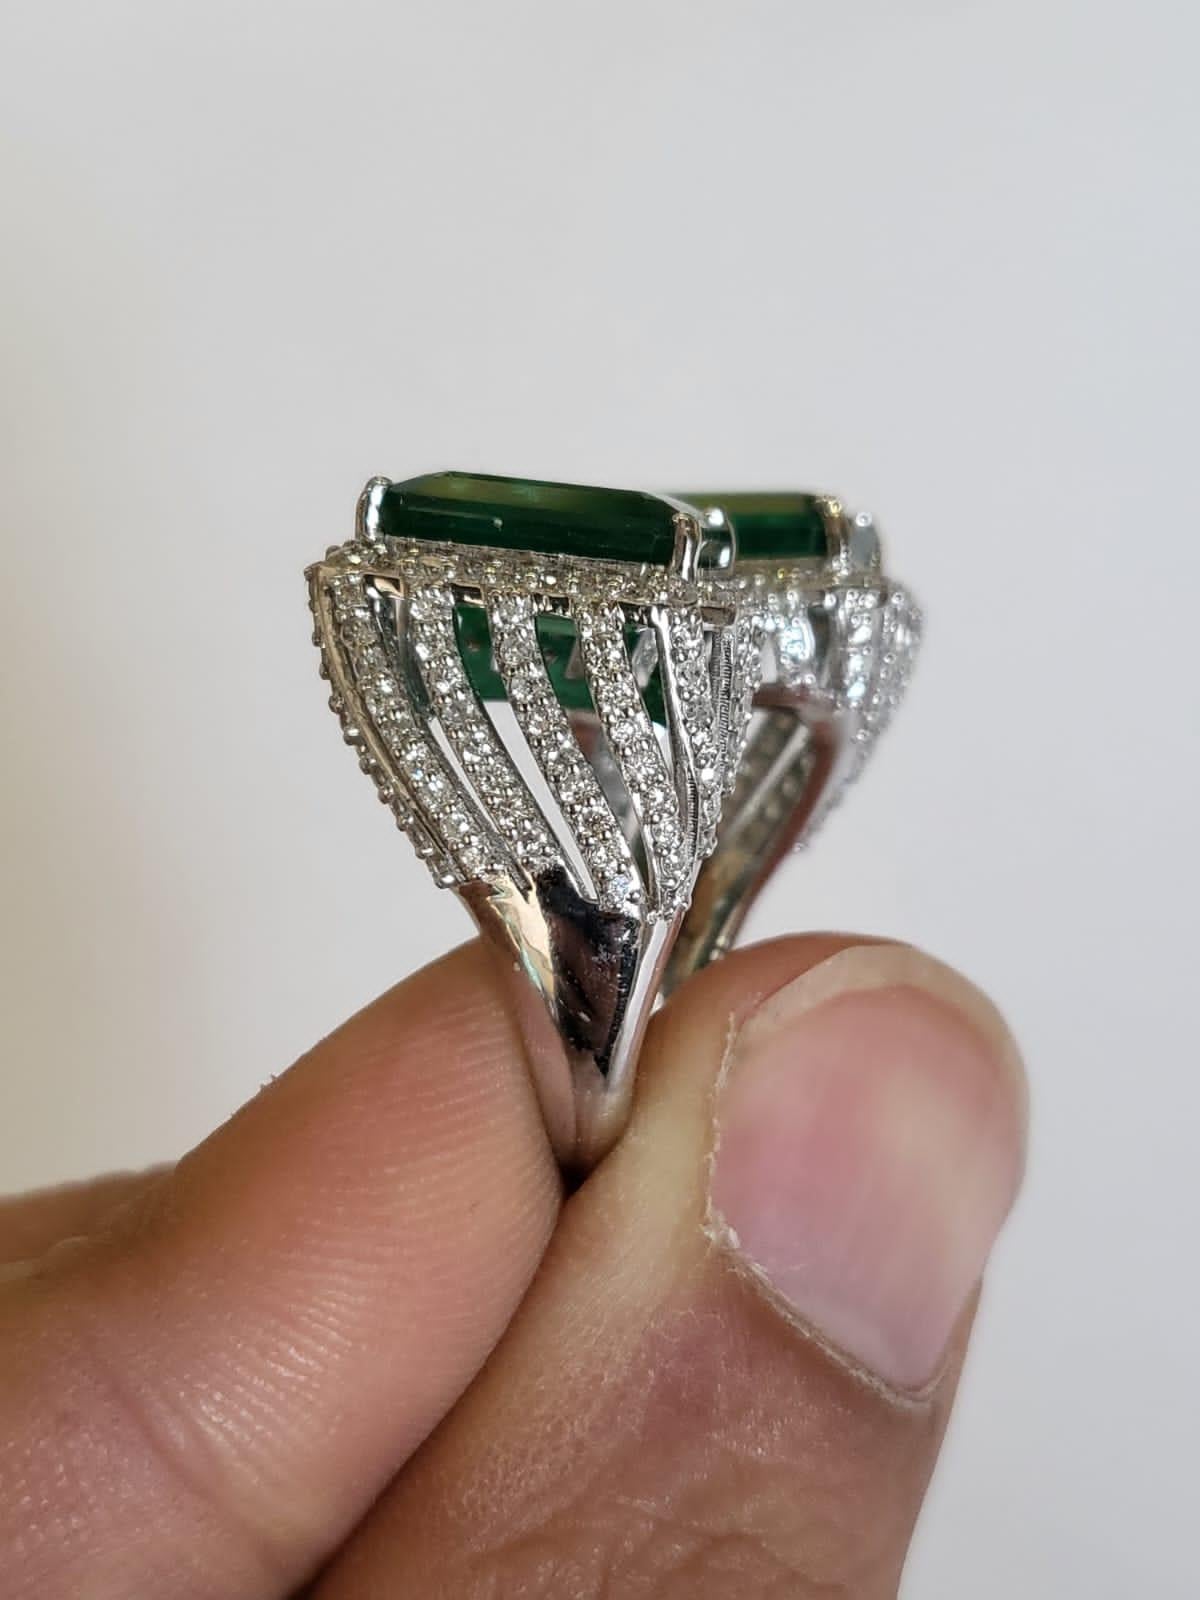 A stunning Emerald Engagement Ring set in 18K White Gold & Diamonds. The weight of the Emeralds is 7.62 carats. The Emeralds are completely natural, without any treatment and is of Zambian origin. The weight of the Diamonds is 1.46 carats. Net Gold